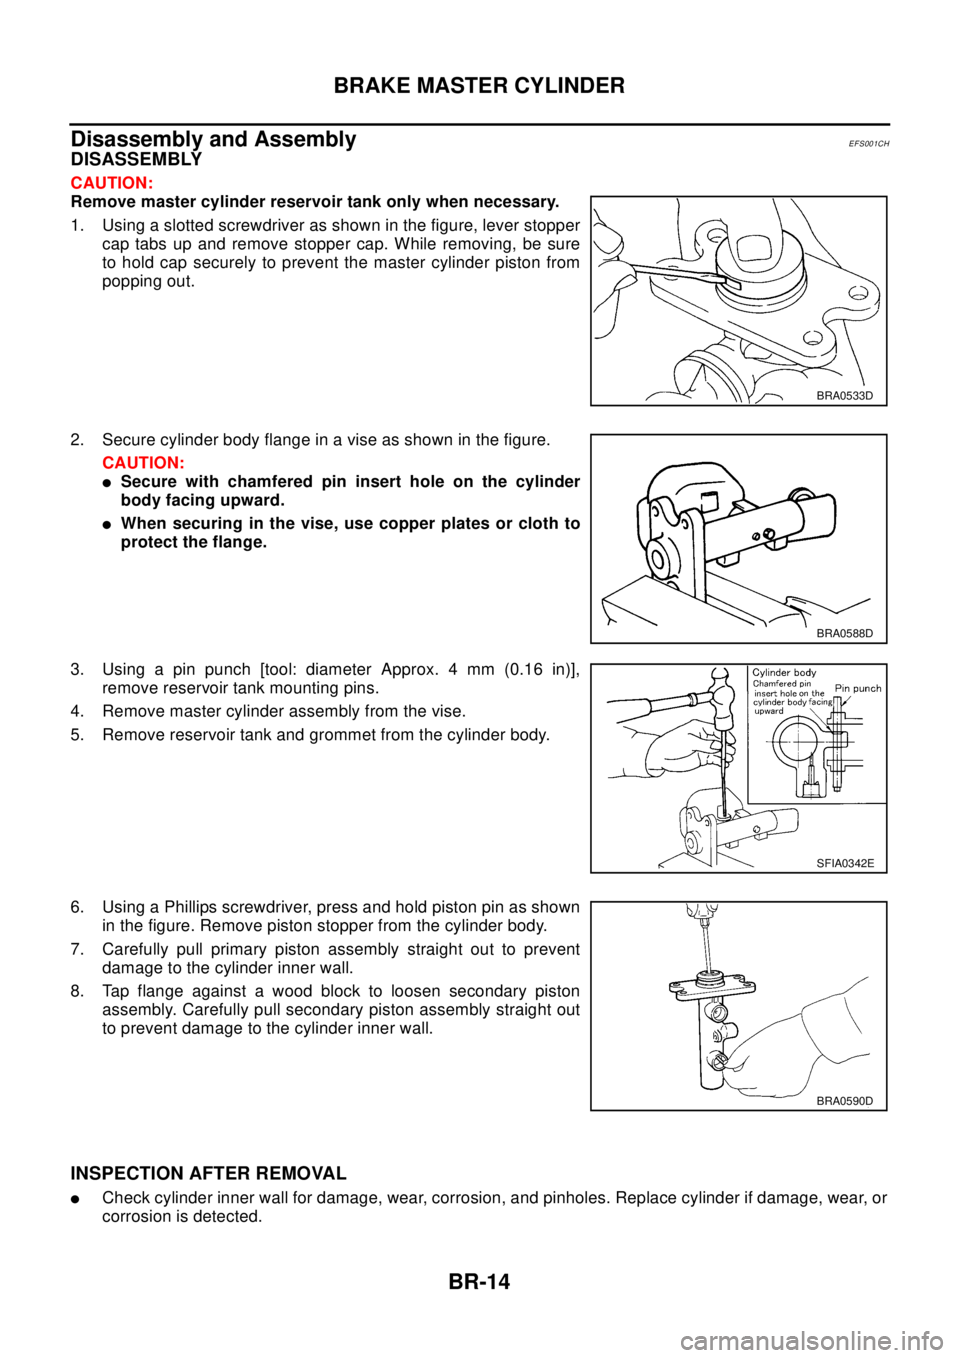 NISSAN X-TRAIL 2003  Electronic Repair Manual BR-14
BRAKE MASTER CYLINDER
Disassembly and Assembly
EFS001CH
DISASSEMBLY
CAUTION:
Remove master cylinder reservoir tank only when necessary.
1. Using a slotted screwdriver as shown in the figure, lev